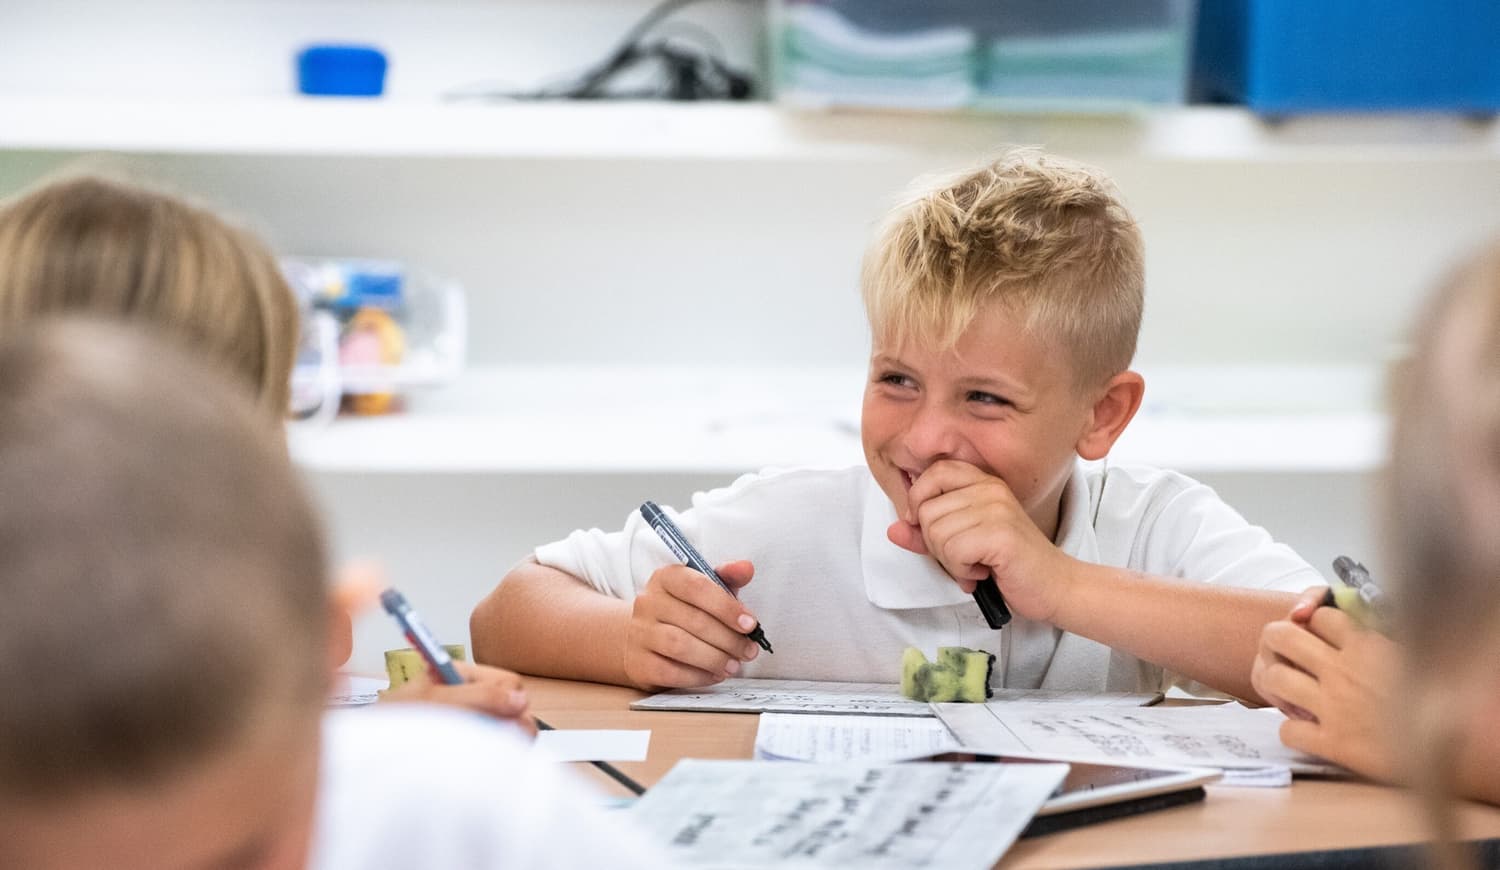 Student smiling and writing